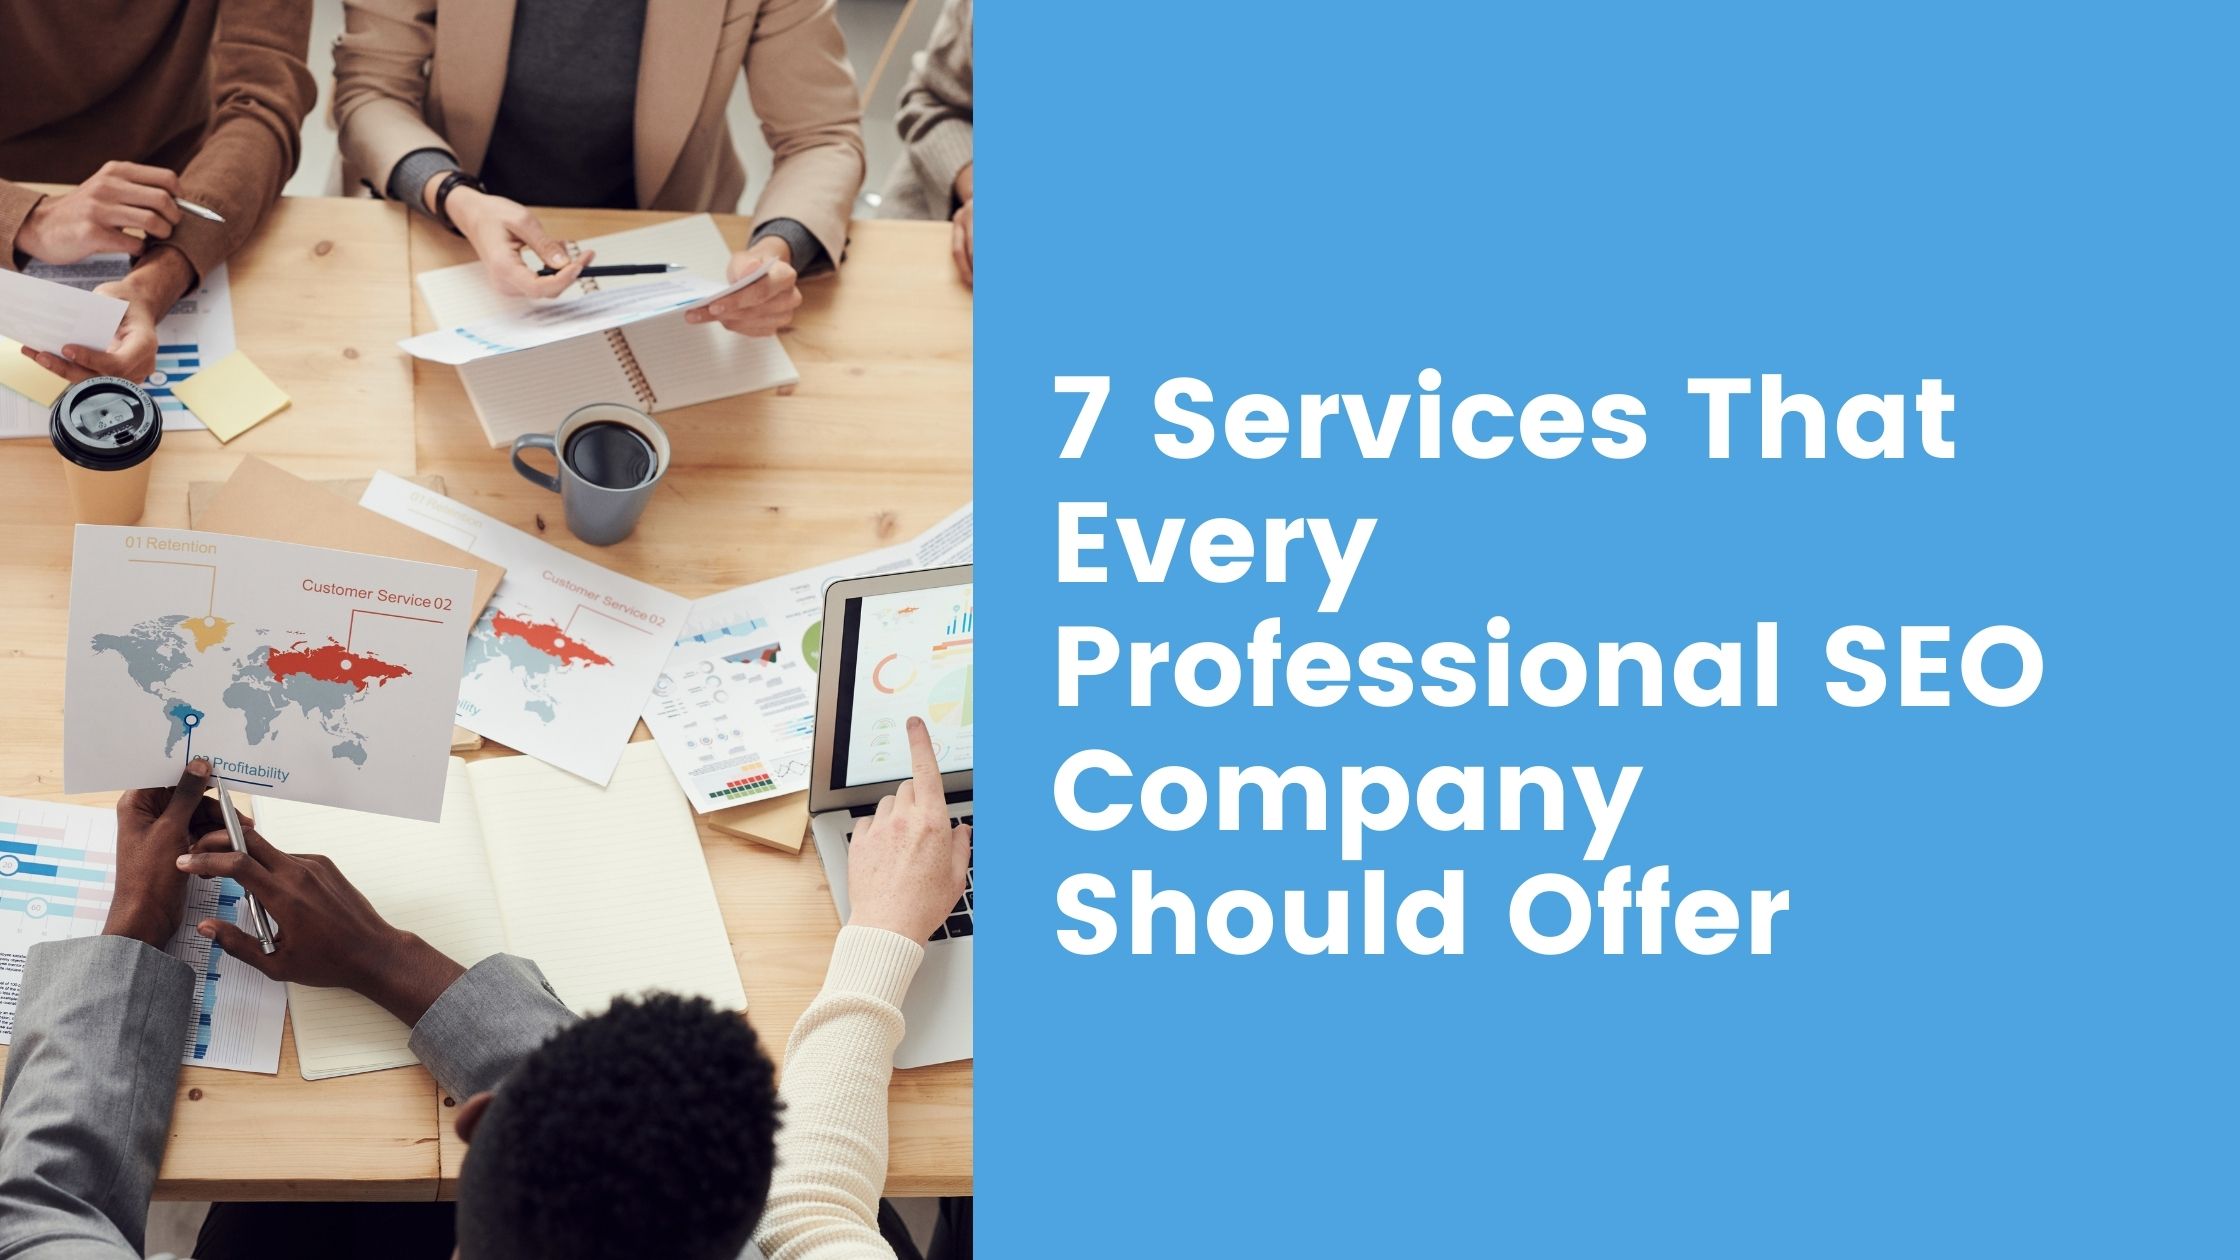 7 Services That Every Professional SEO Company Should Offer